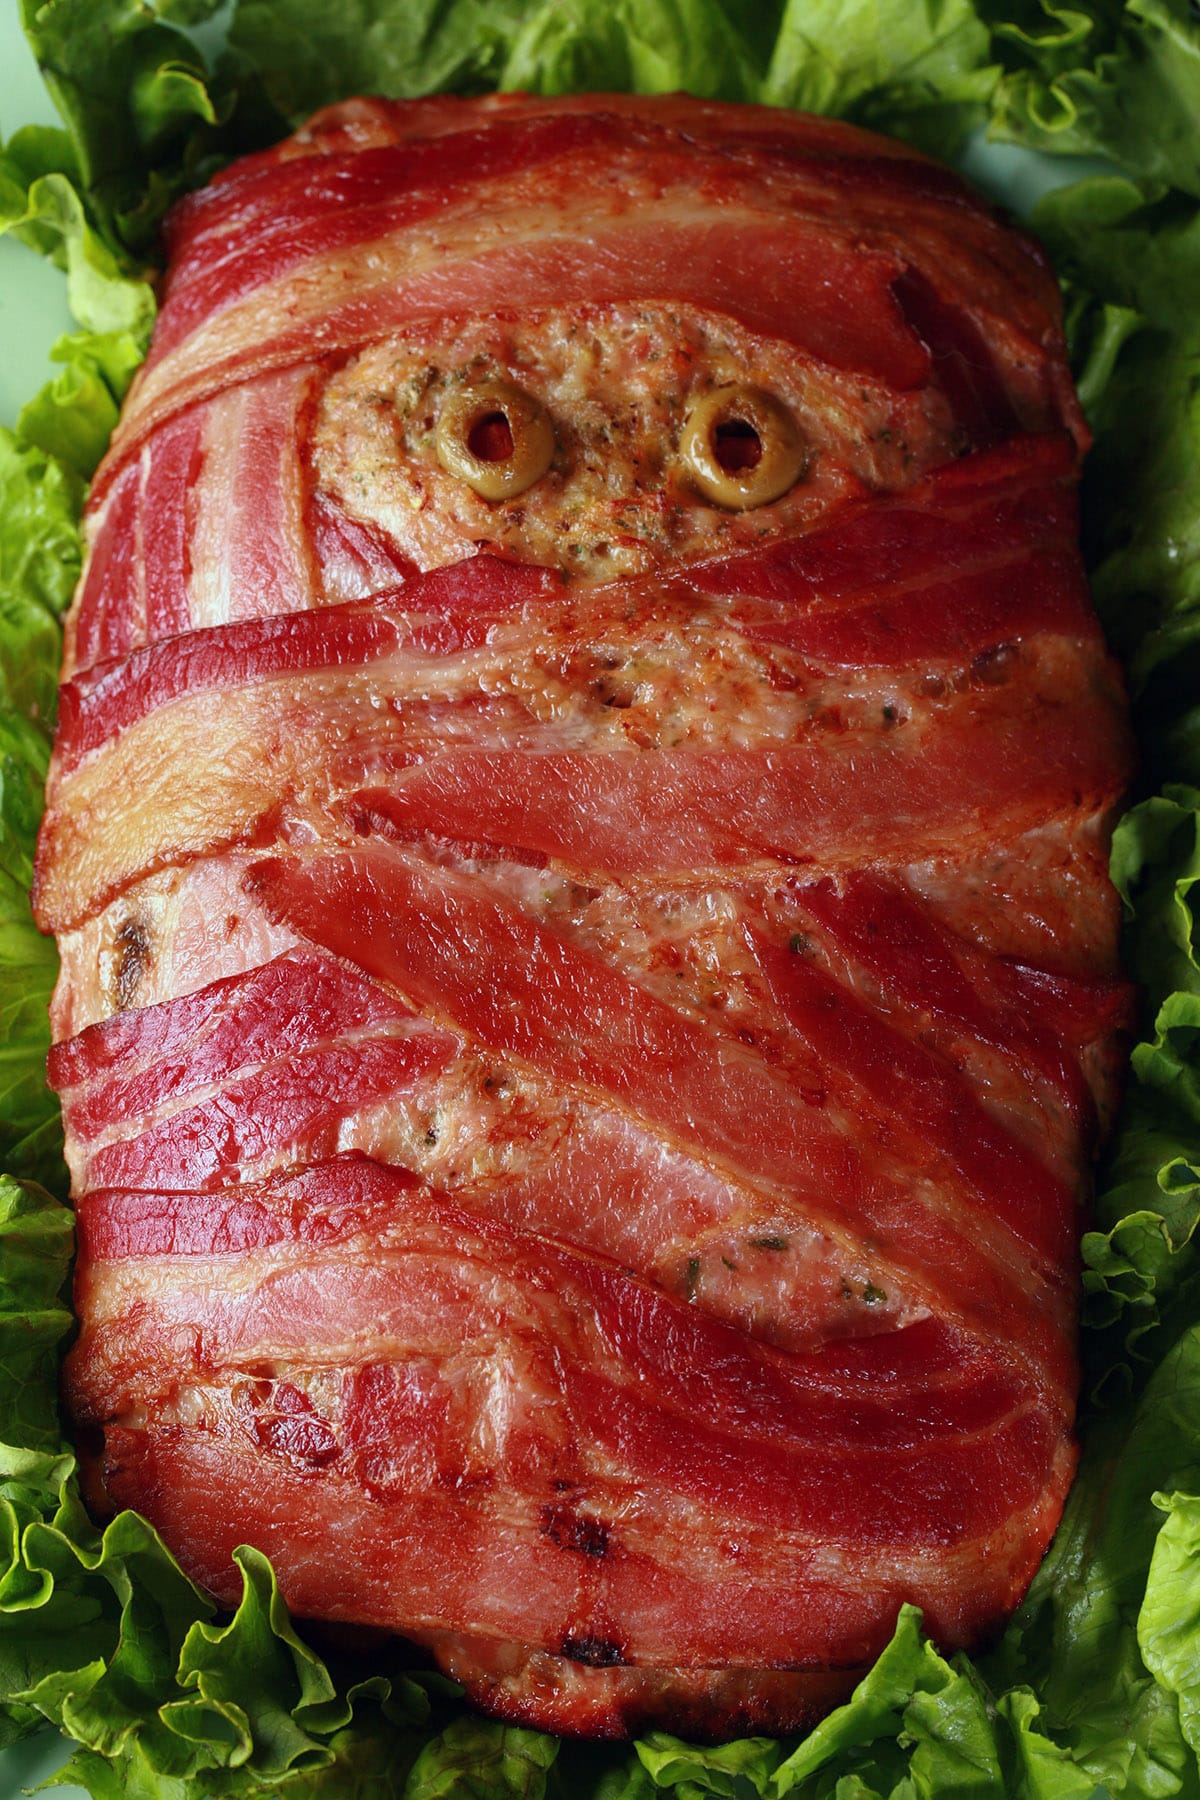 A halloween meatloaf, wrapped in bacon to look like a mummy. It has olive eyes.